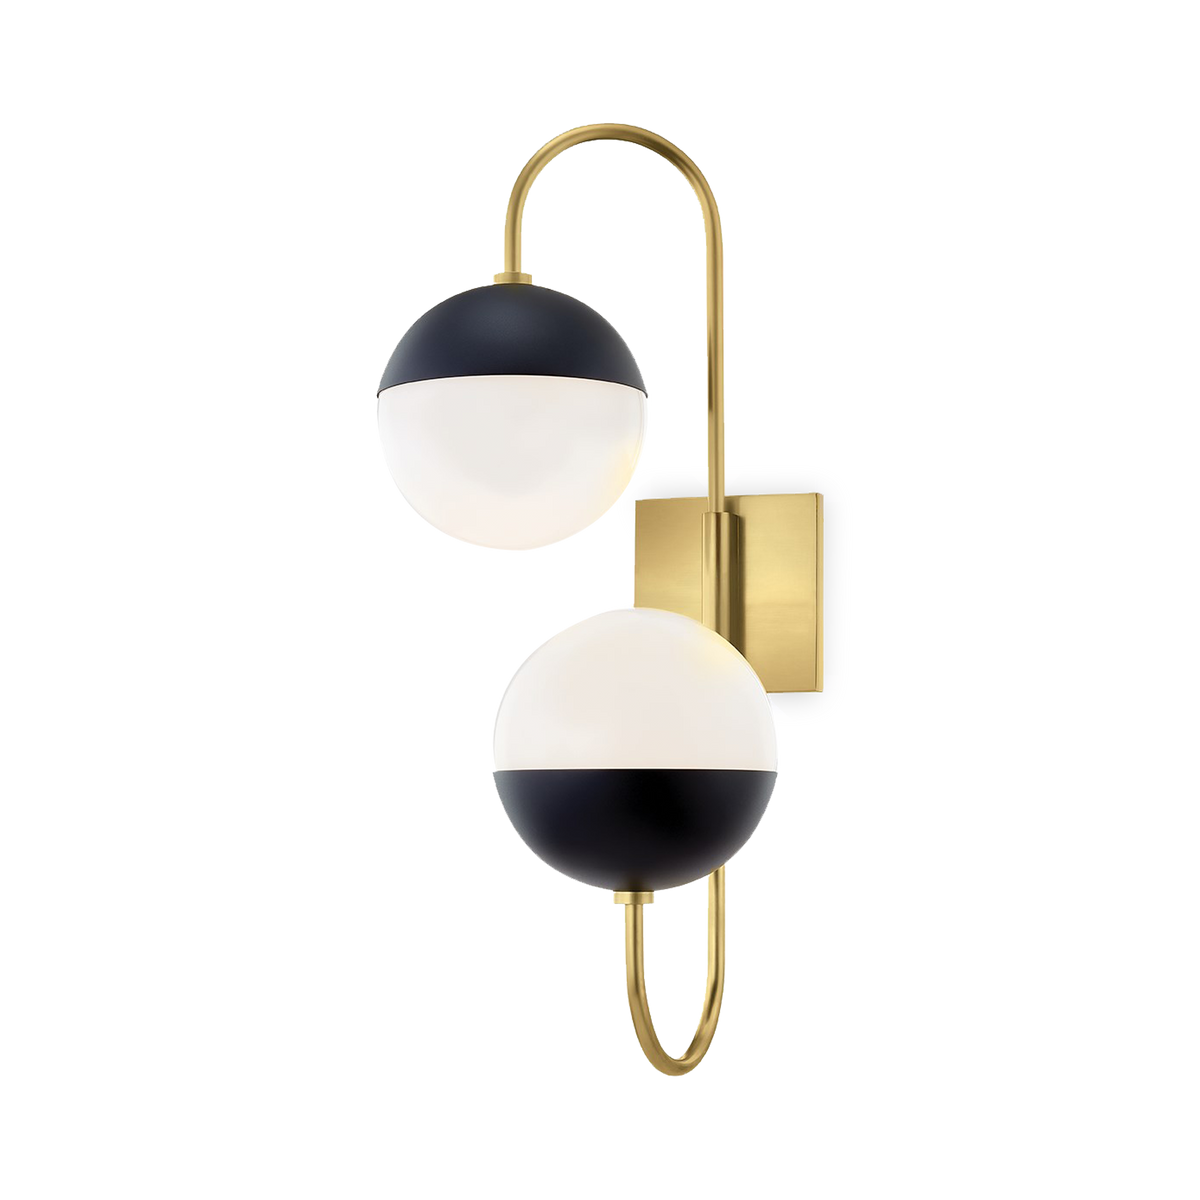 Elegant and modern, this double wall light features two orbs  with black shades, supported on aged-brass hardware.